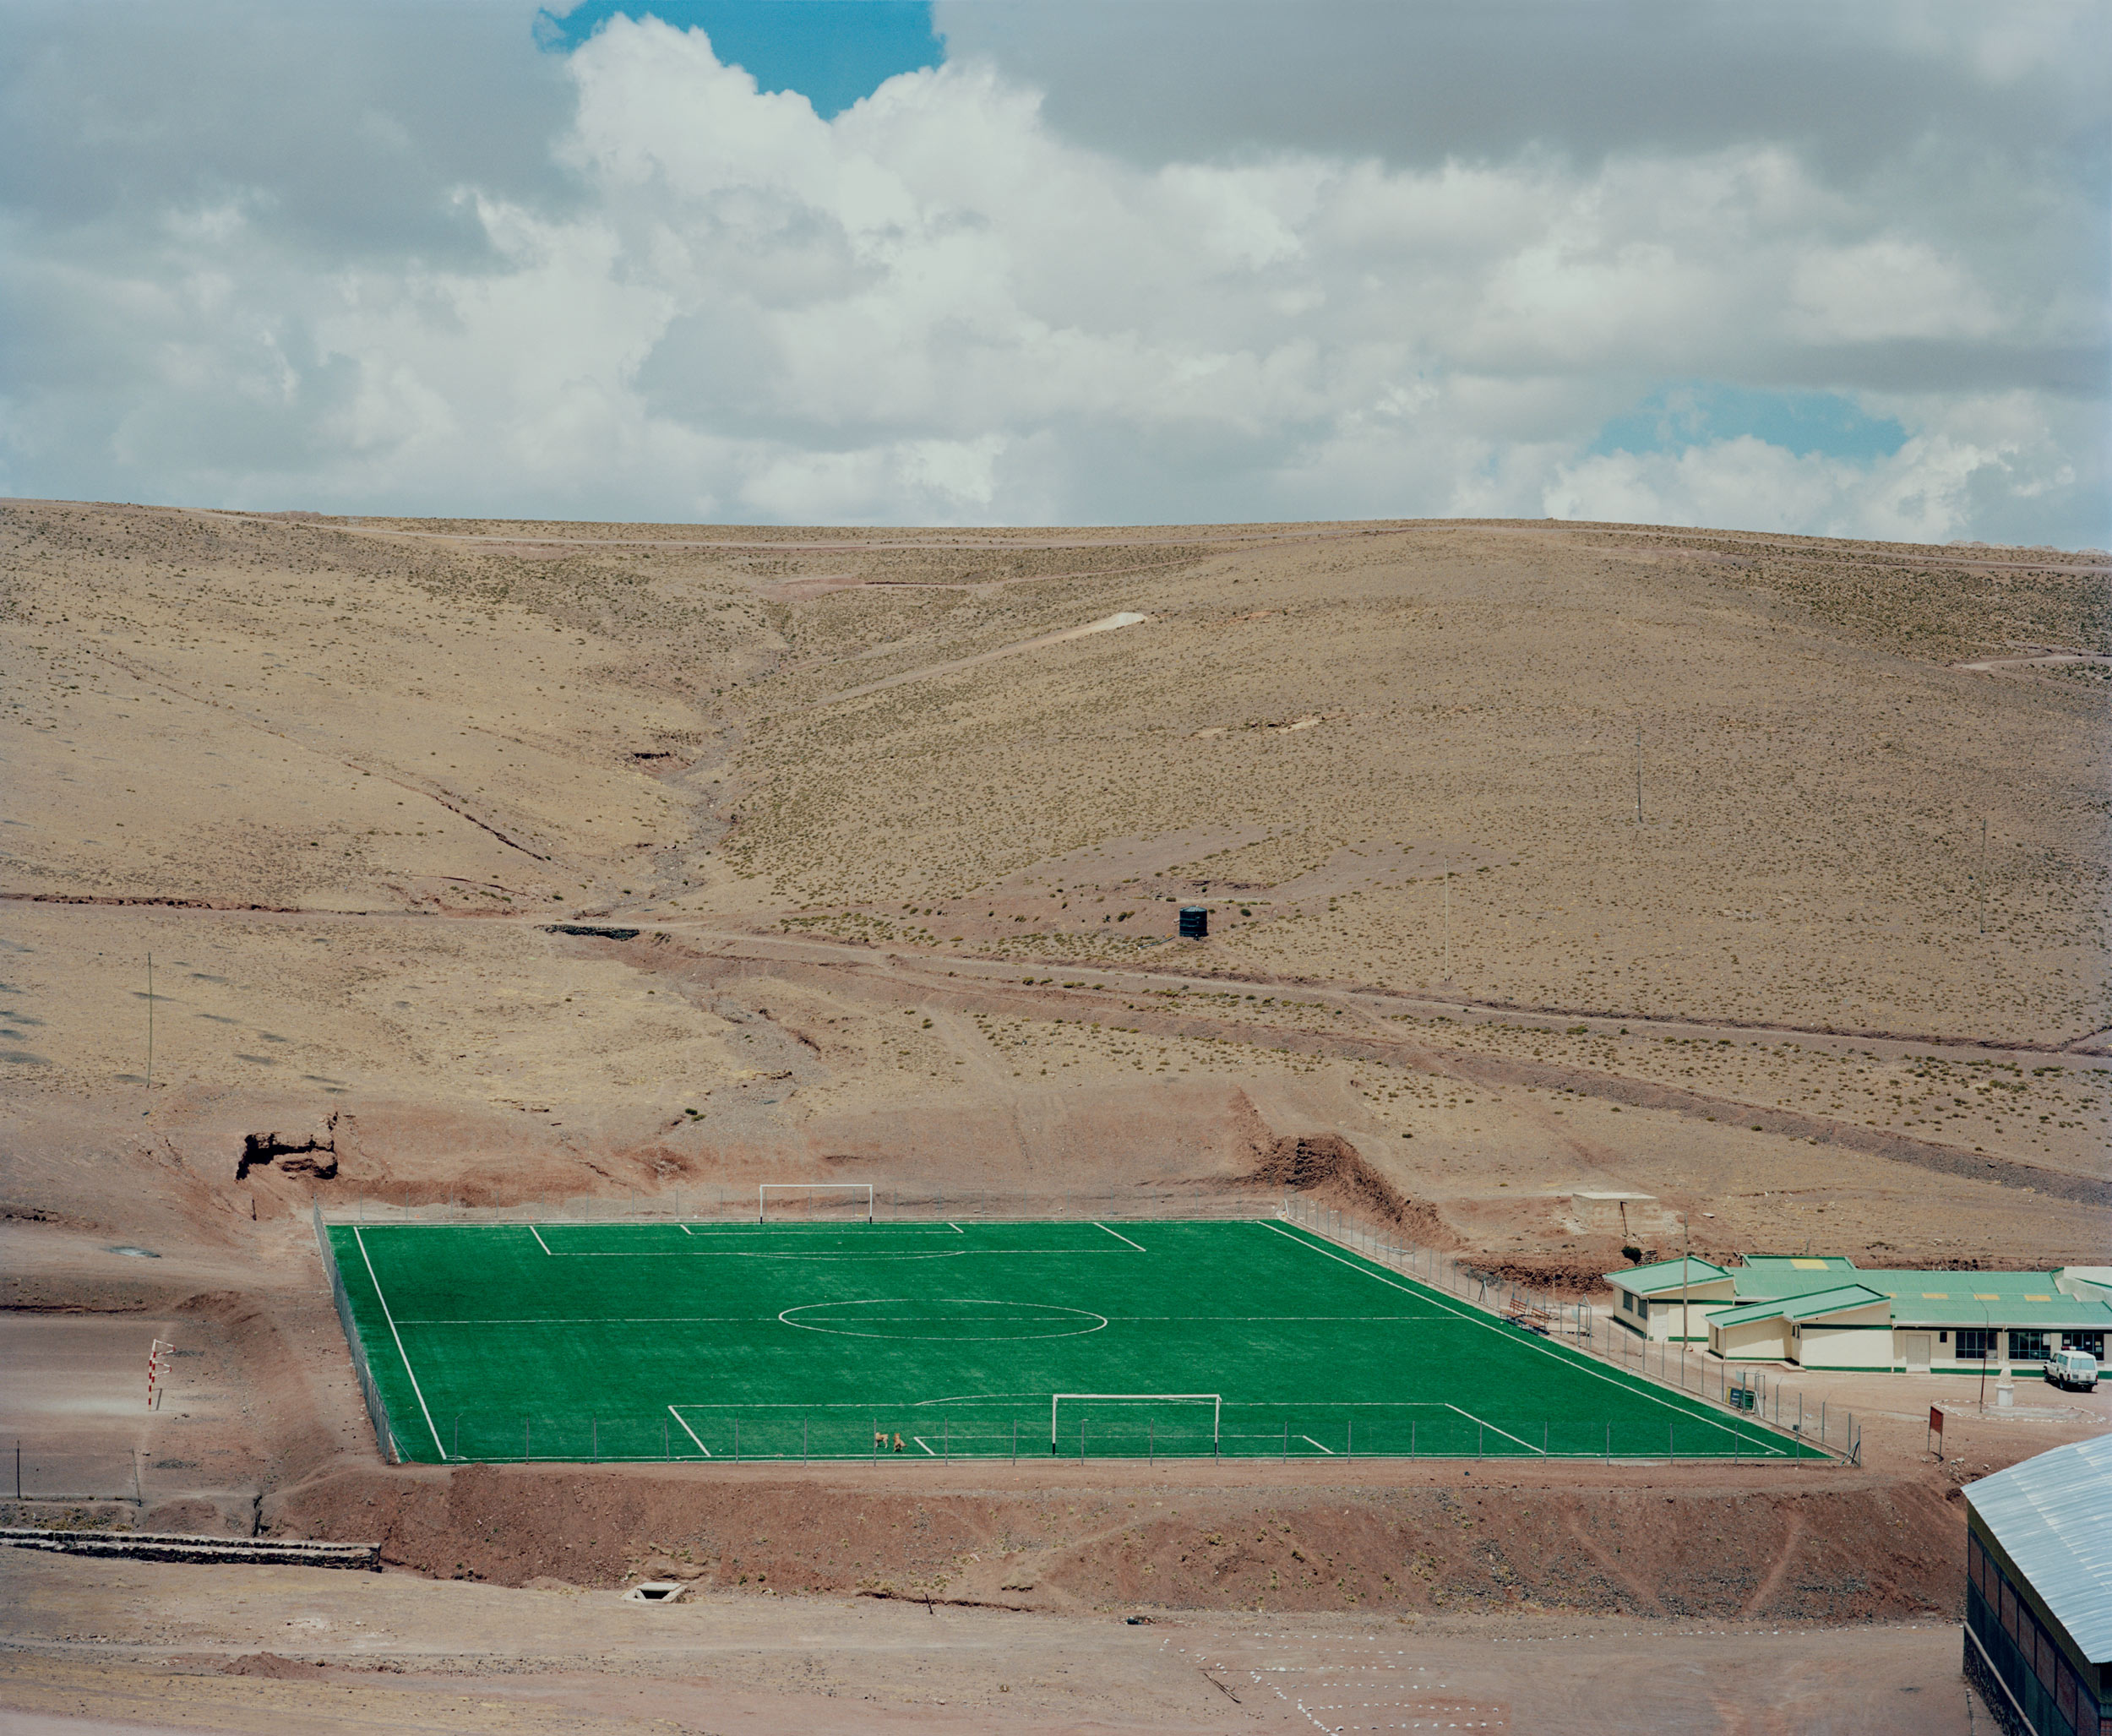 Artificial football field built by Pan American silver mining company for its staff that work at the remote San Vincente.